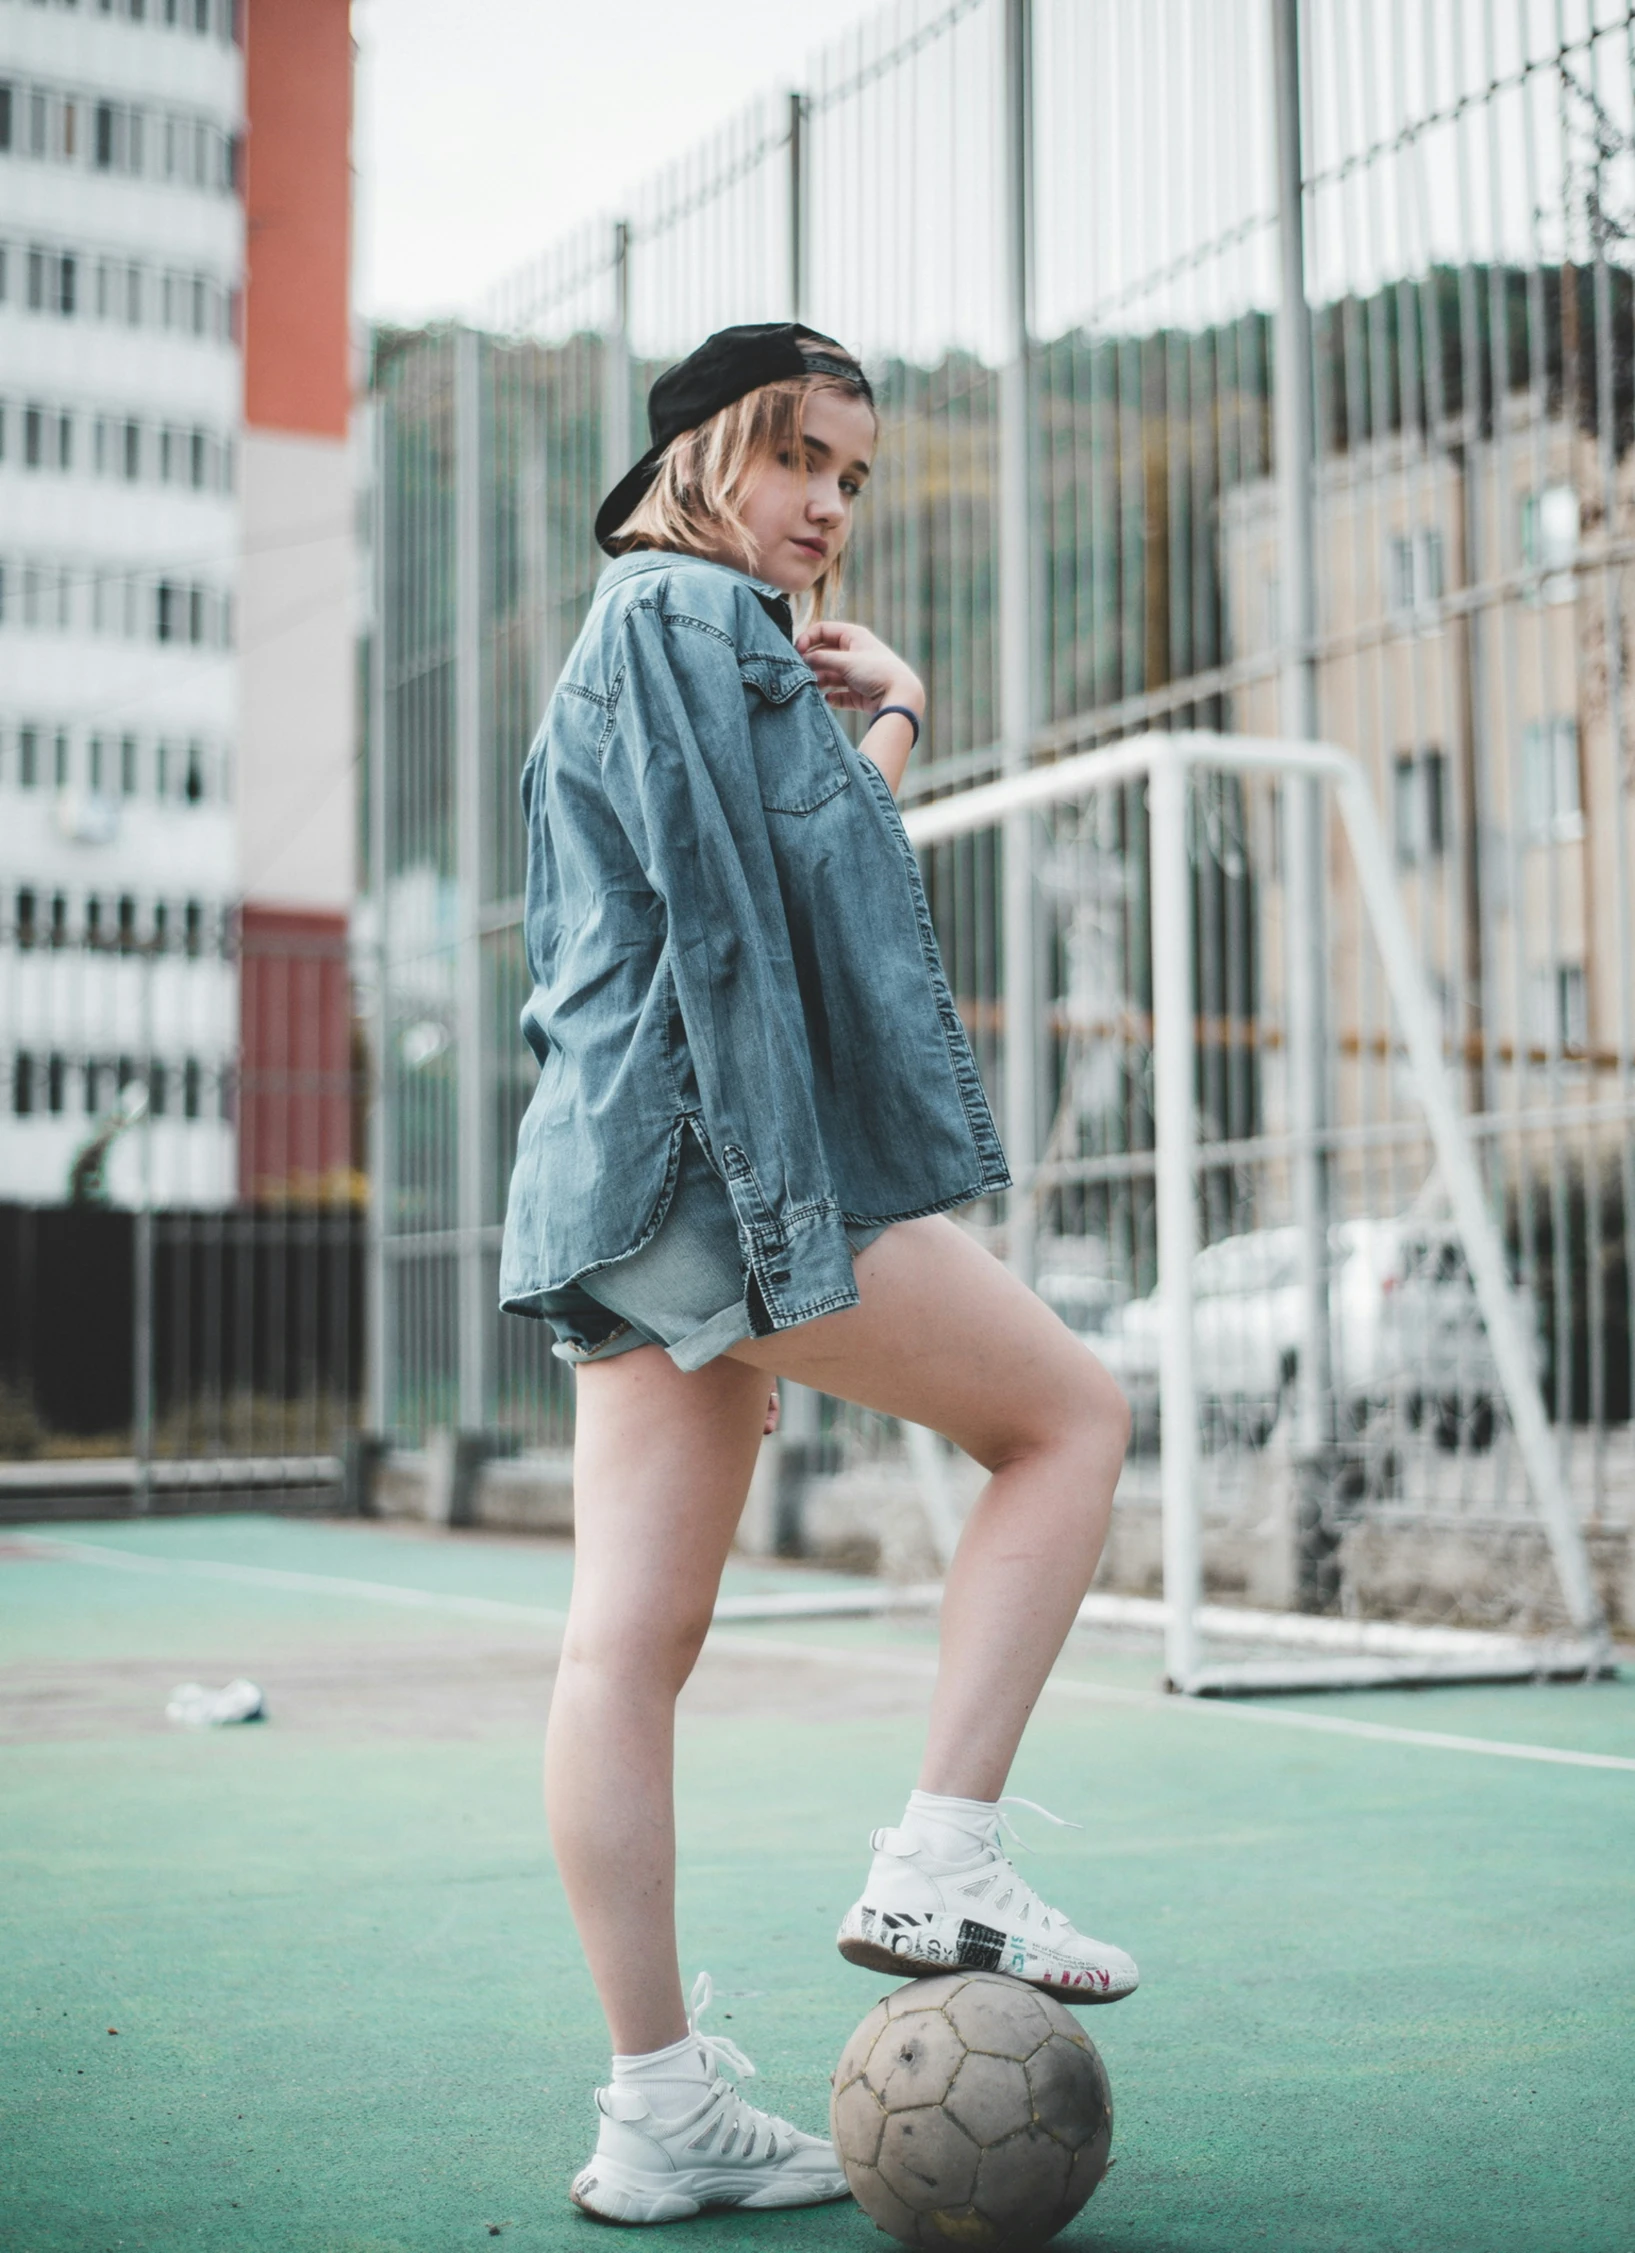 a woman wearing a denim jacket is leaning on a soccer ball